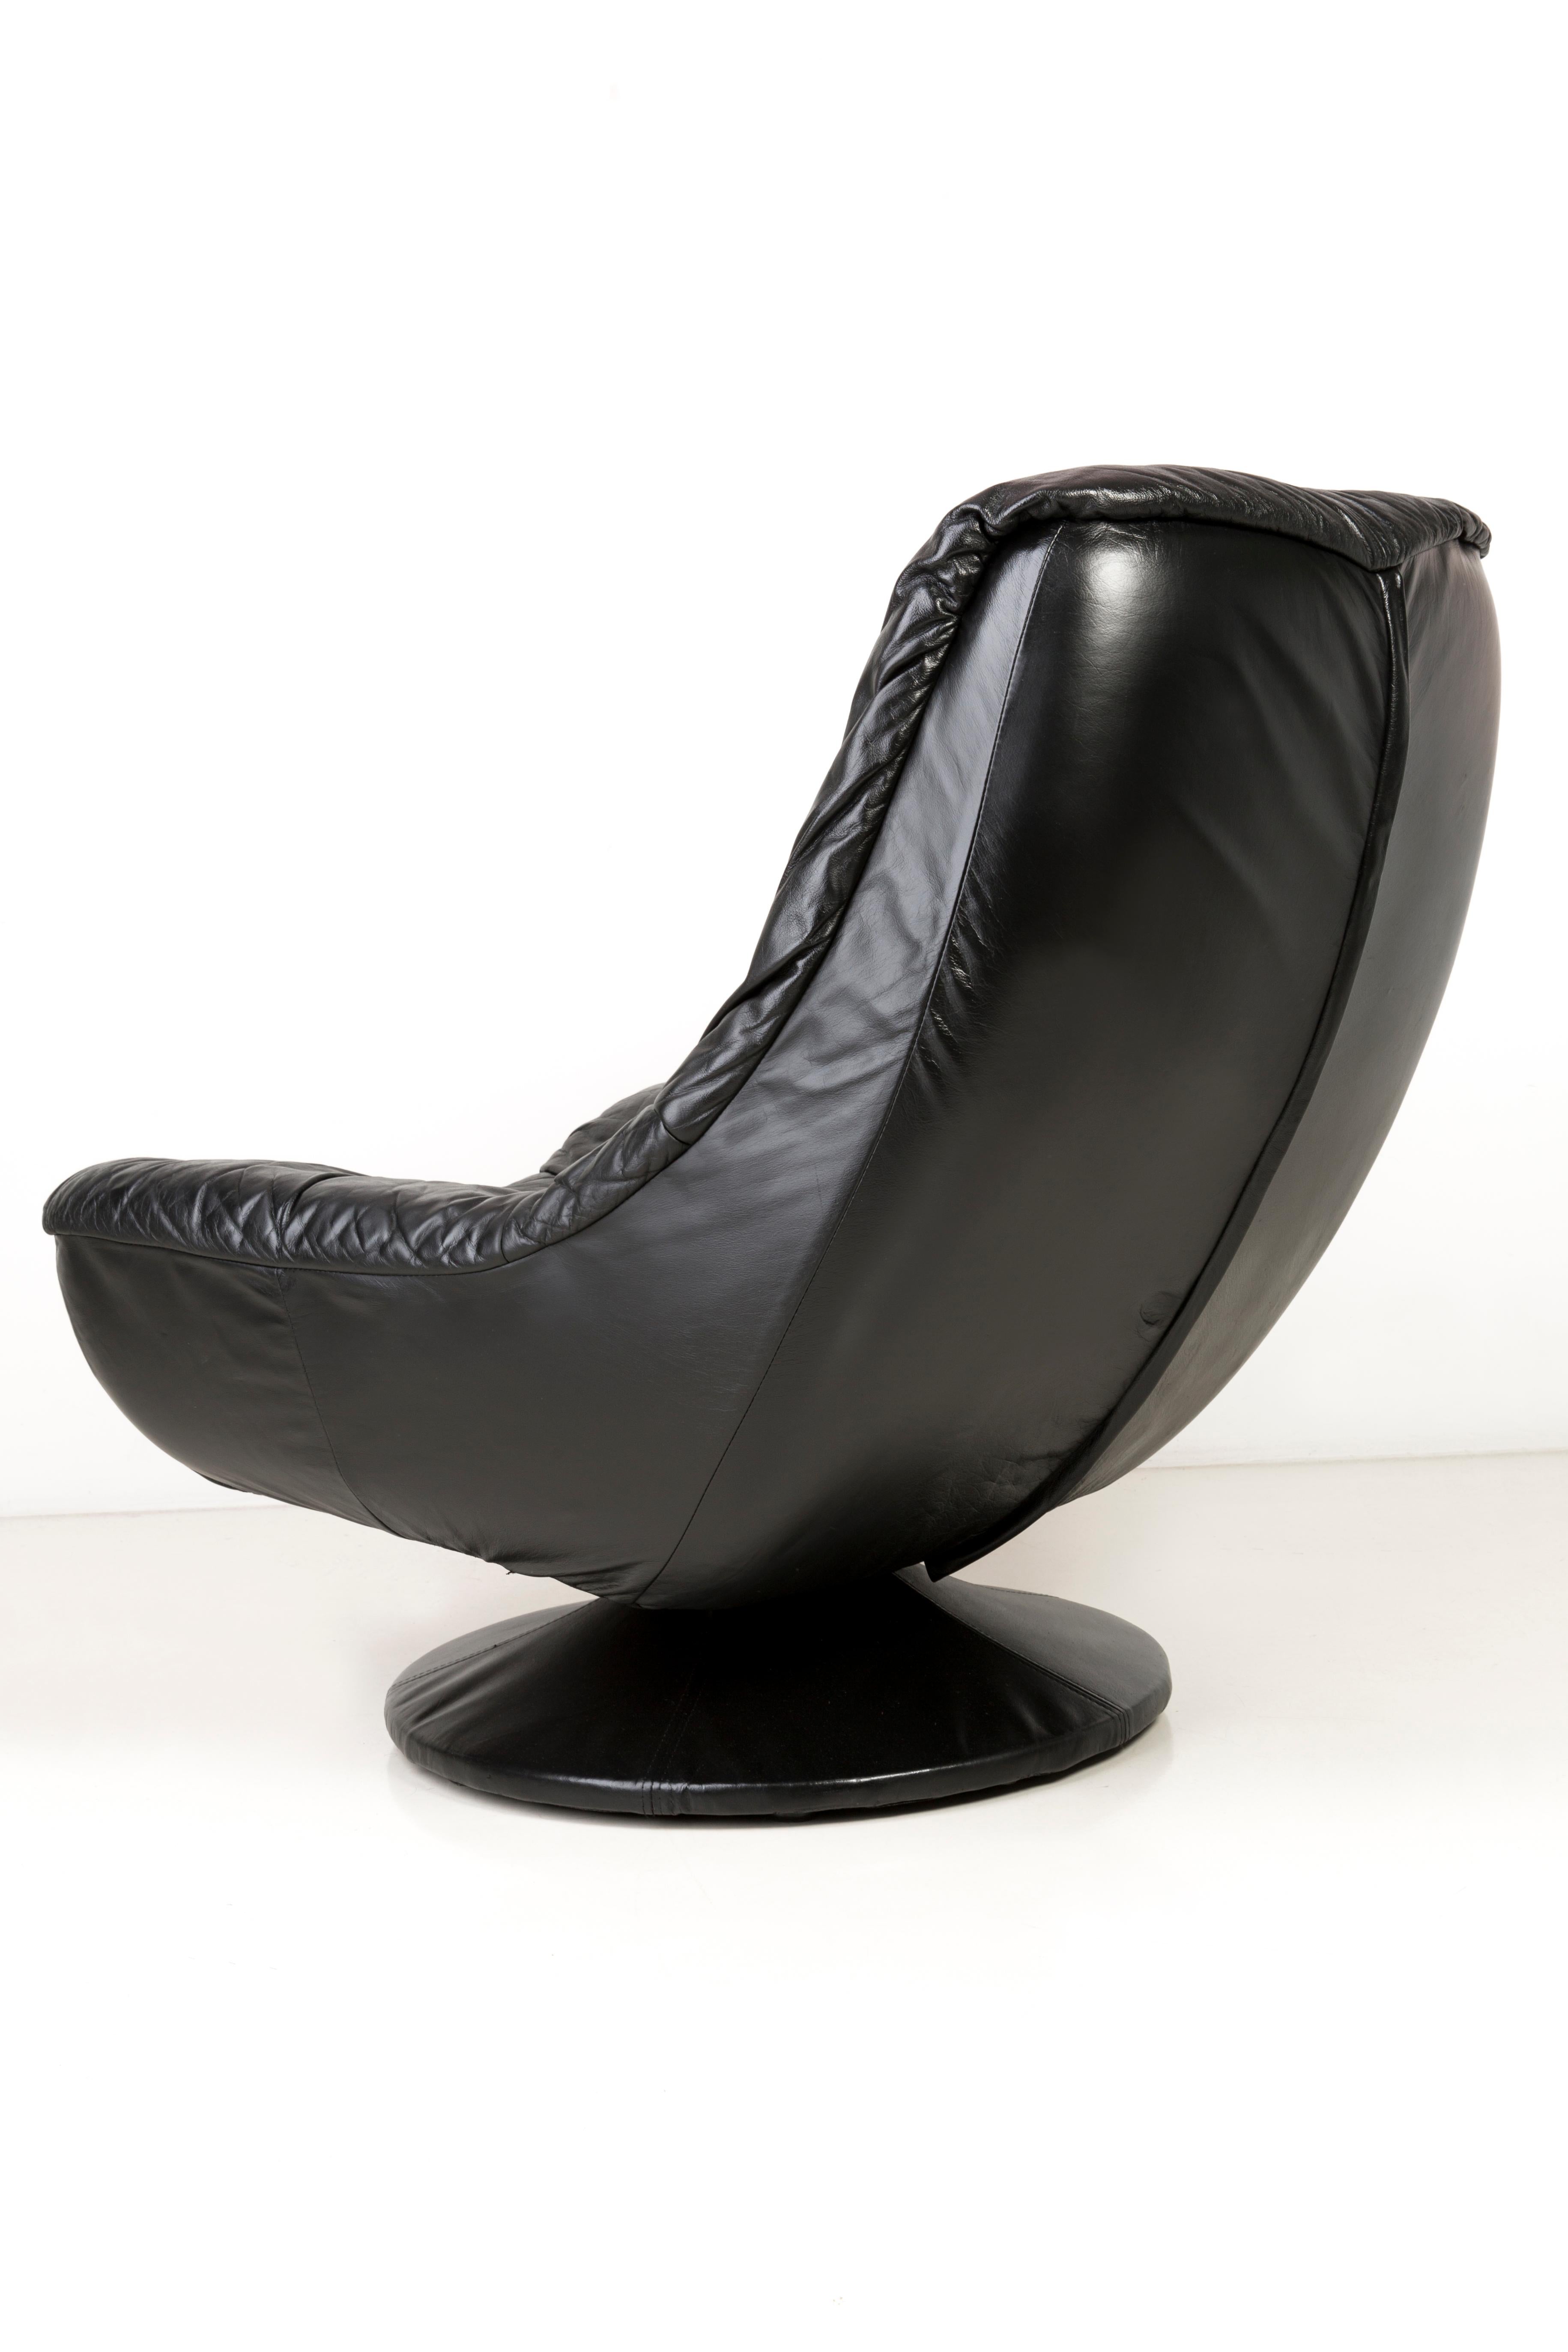 Hand-Crafted 20th Century Vintage Black Leather Swivel Armchair, 1960s For Sale